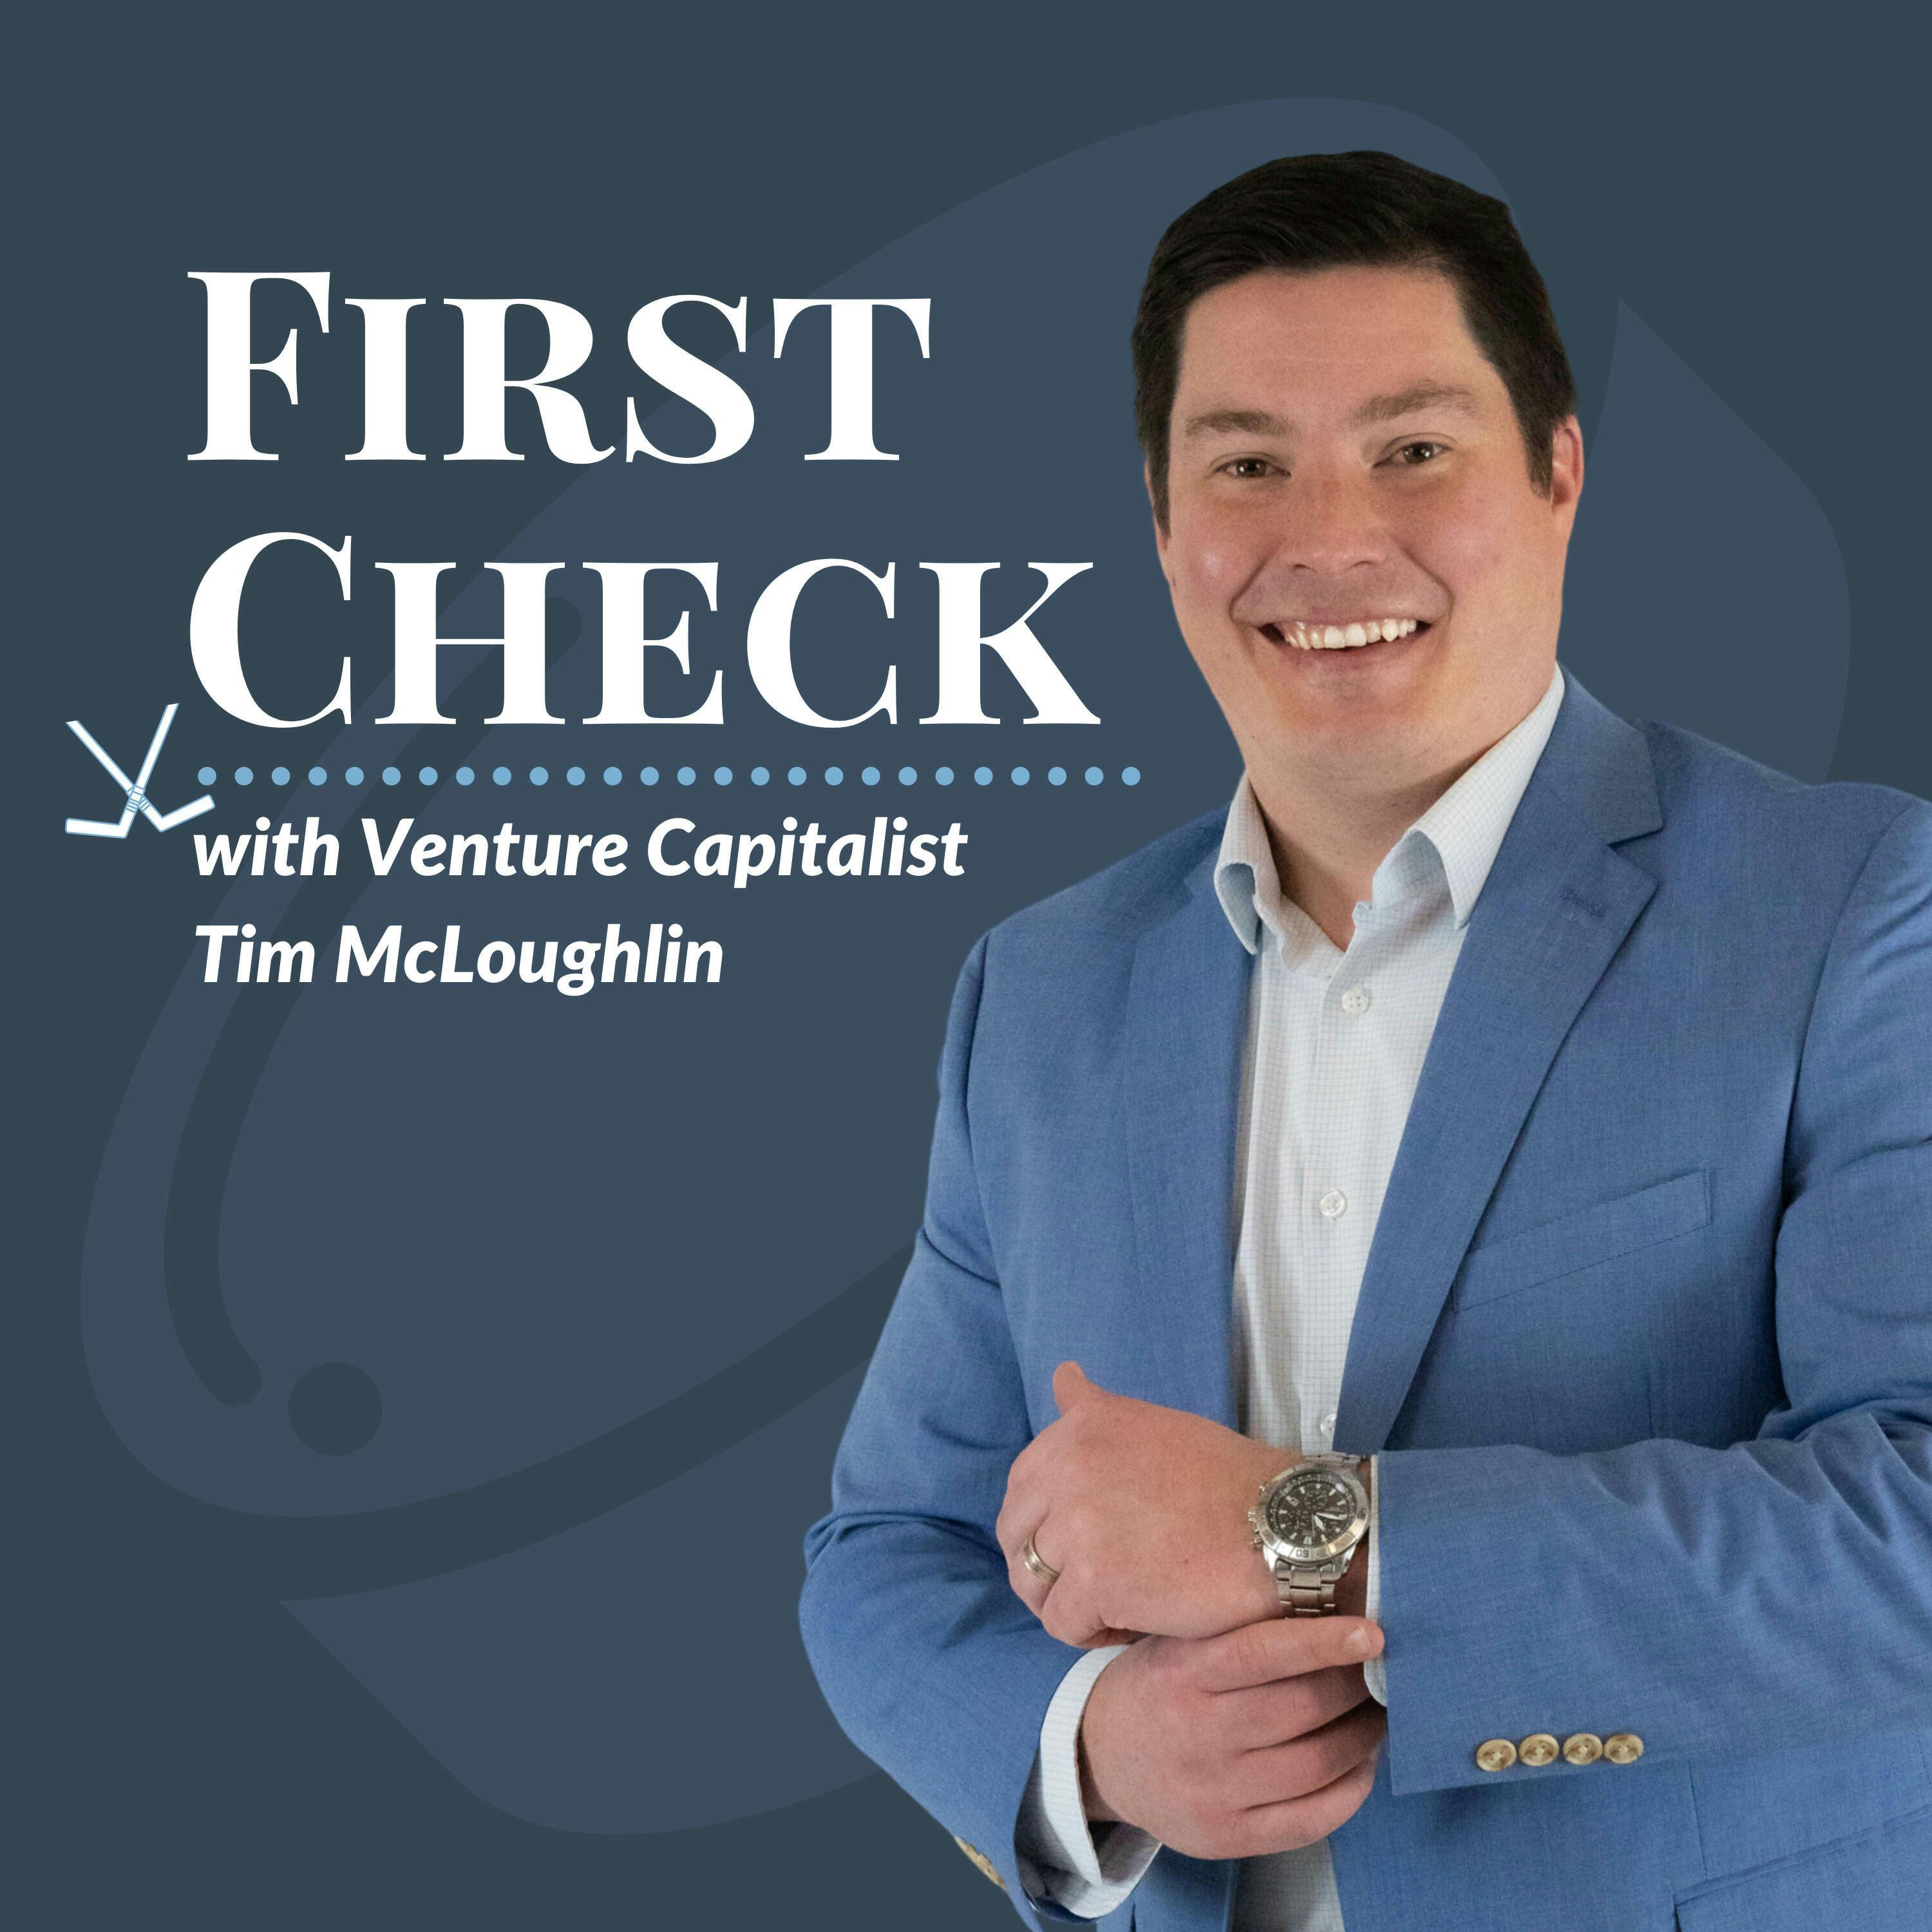 Introducing First Check, with Venture Capitalist Tim McLoughlin